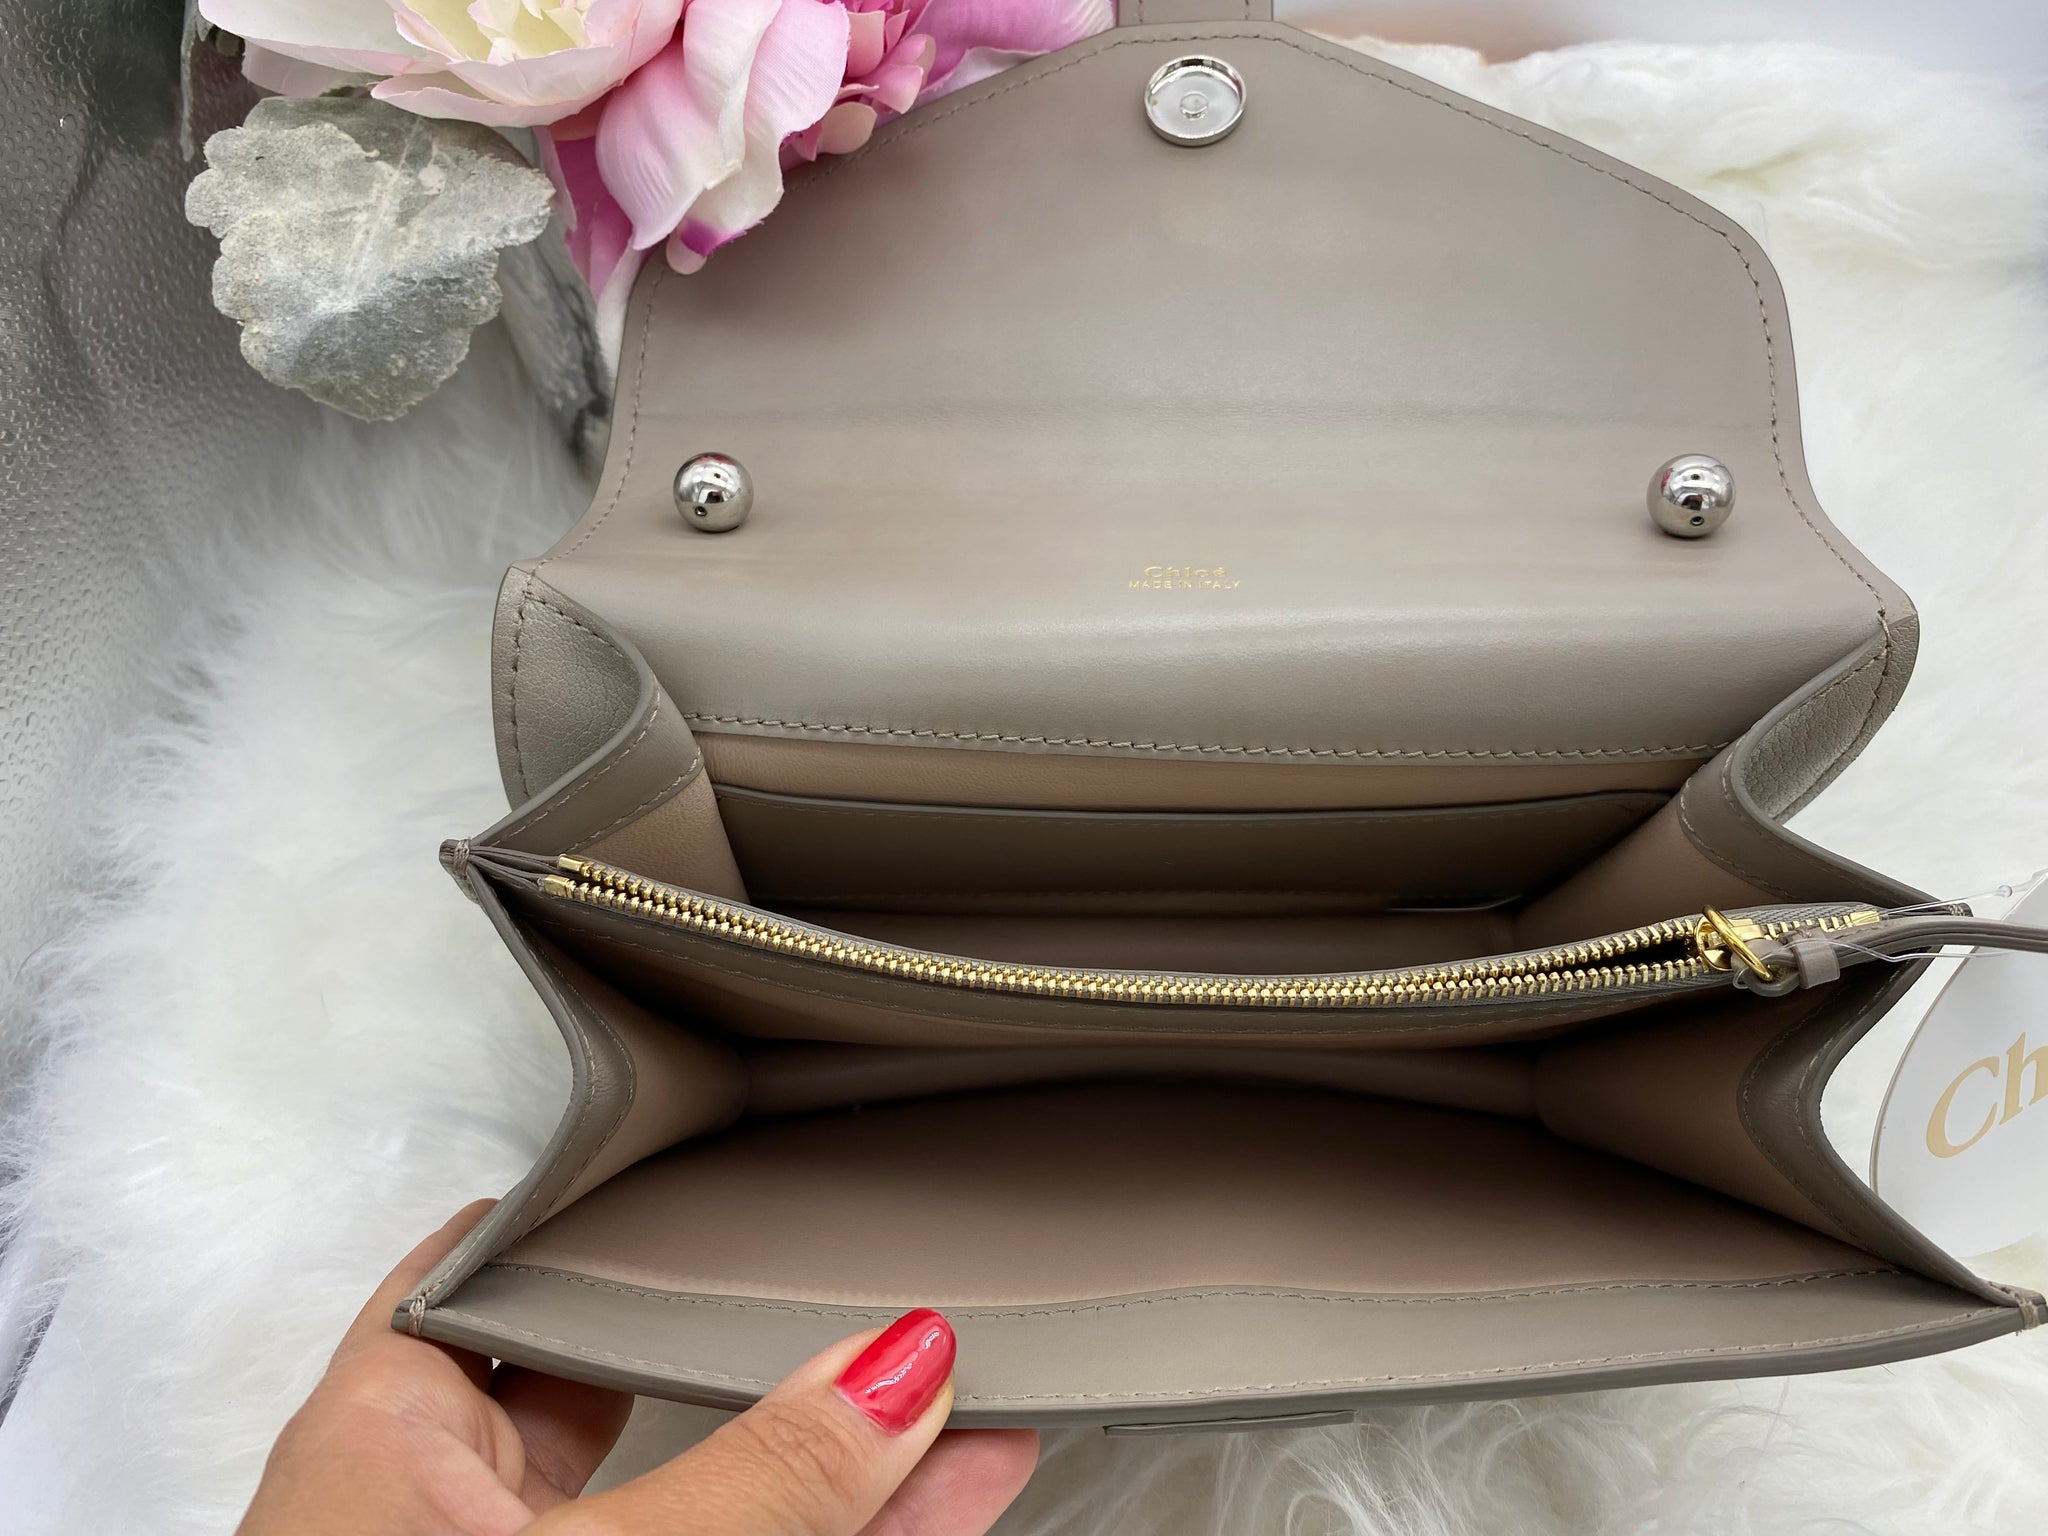 Chloé Aby Chain Bag- BRAND NEW! – HarperHaven.Lux